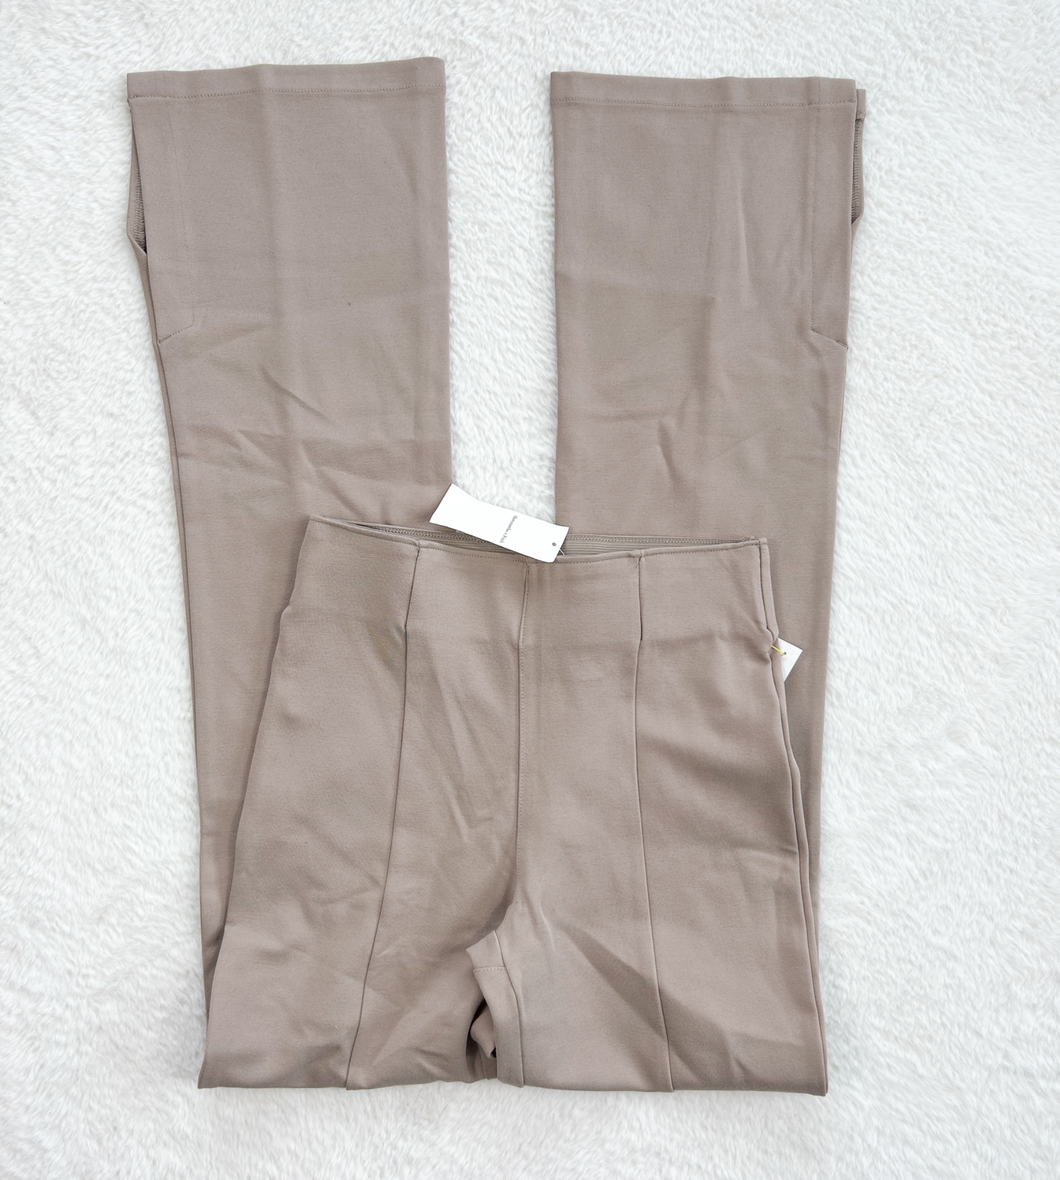 Abercrombie & Fitch Pants Size Extra Small *